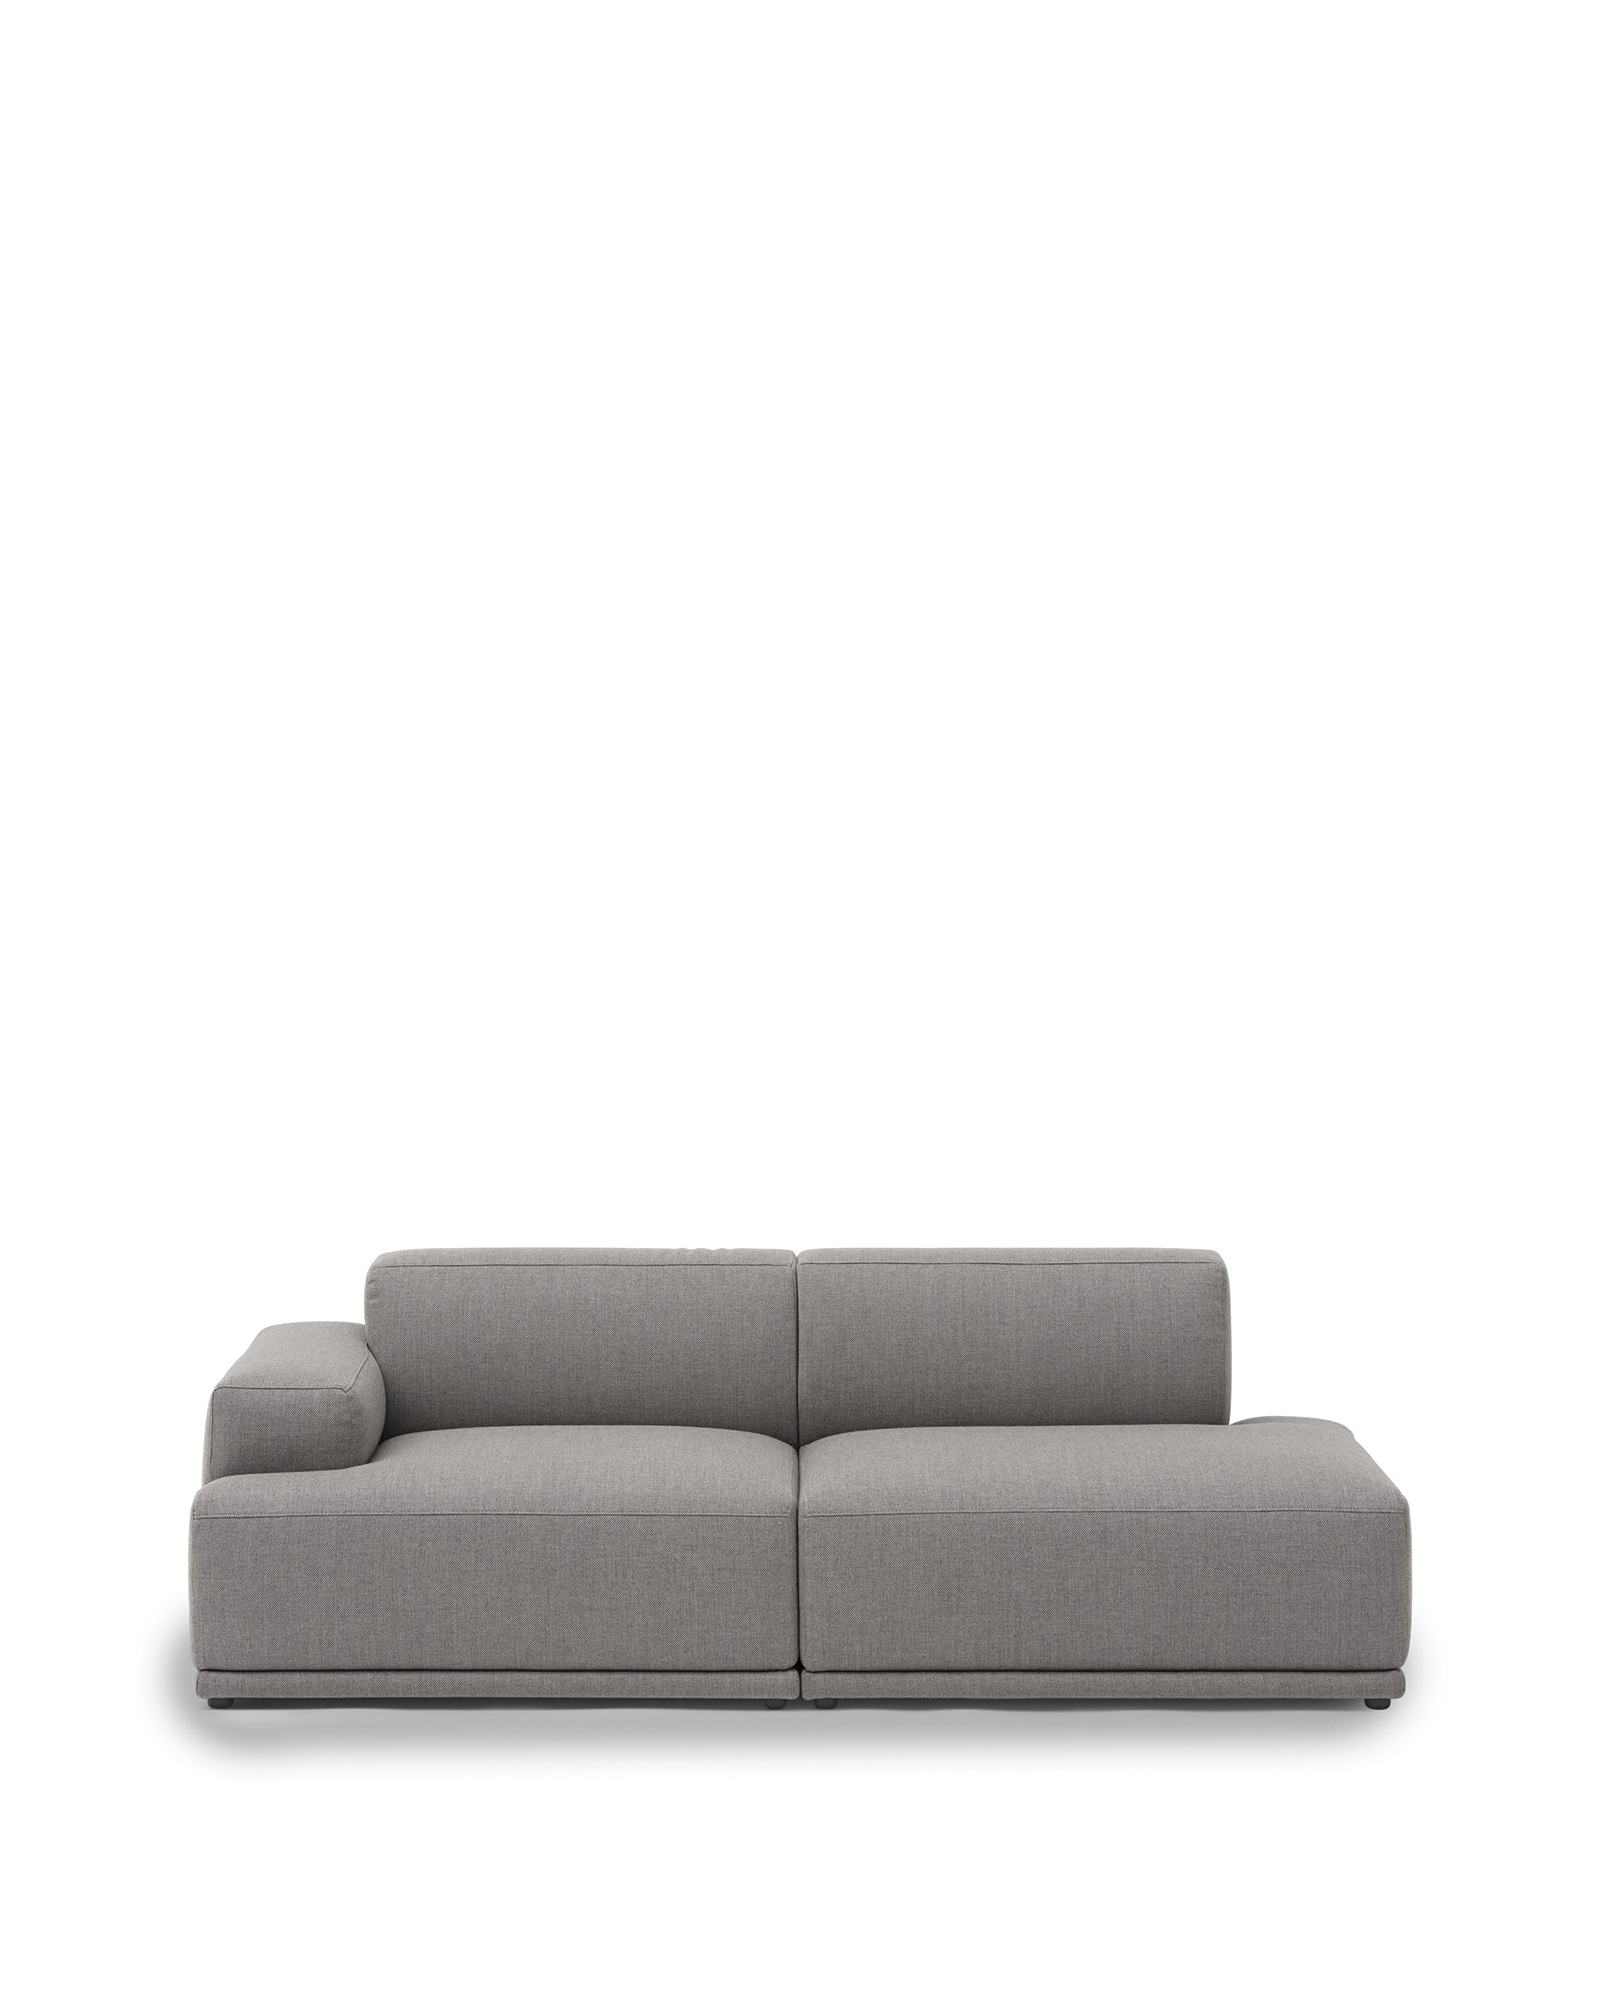 Connect-soft-2-seater-config-2-rewool-128